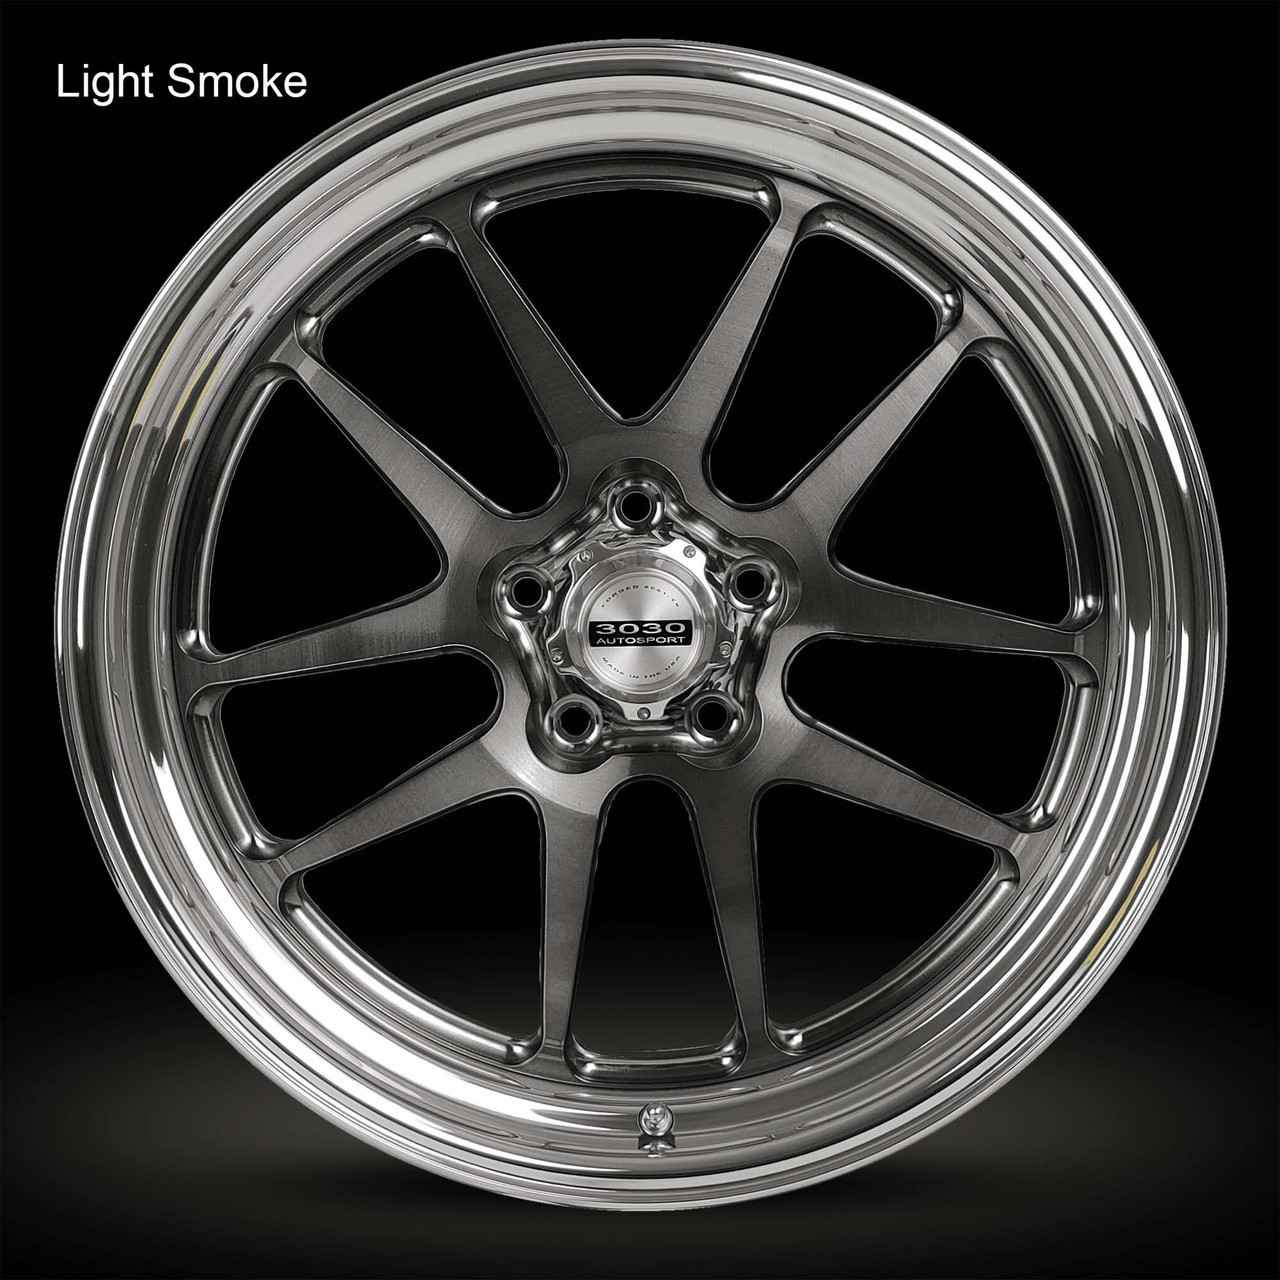 Series G: G05Y - Forged Performance Wheel Series G Forged Pro-Touring Wheels 